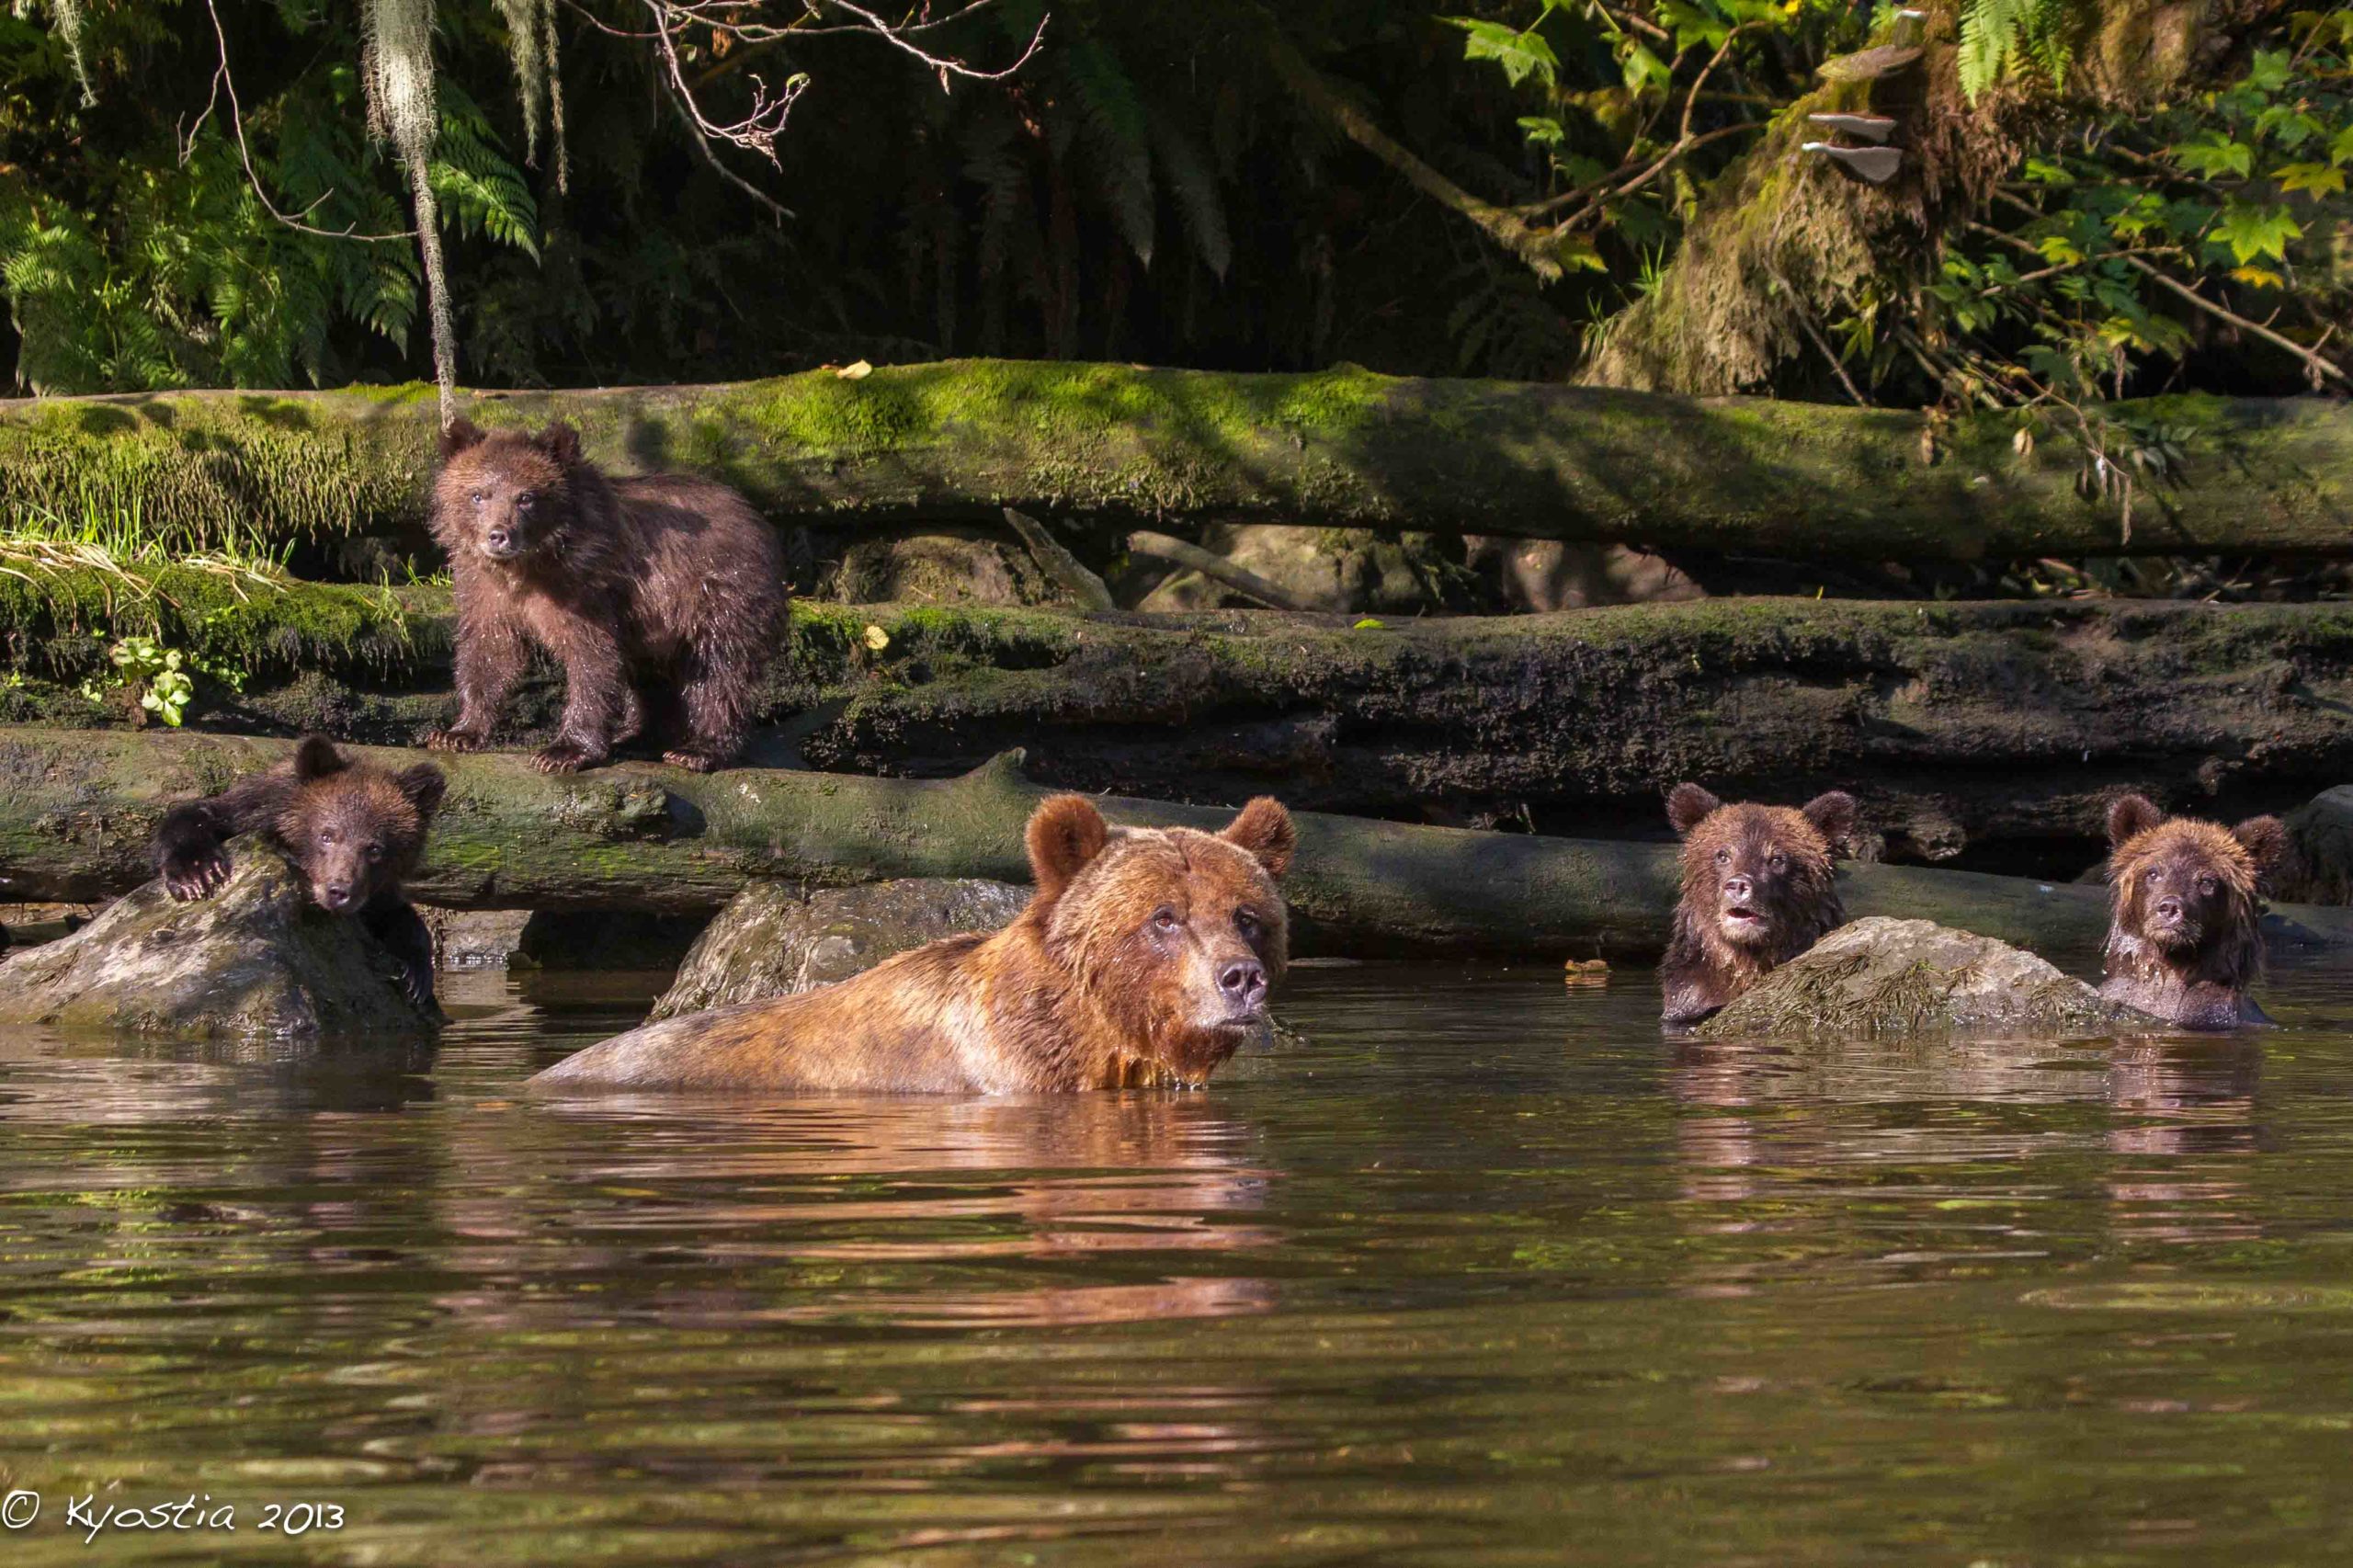 Great Bear Rainforest Tide Rip Grizzly Adventures